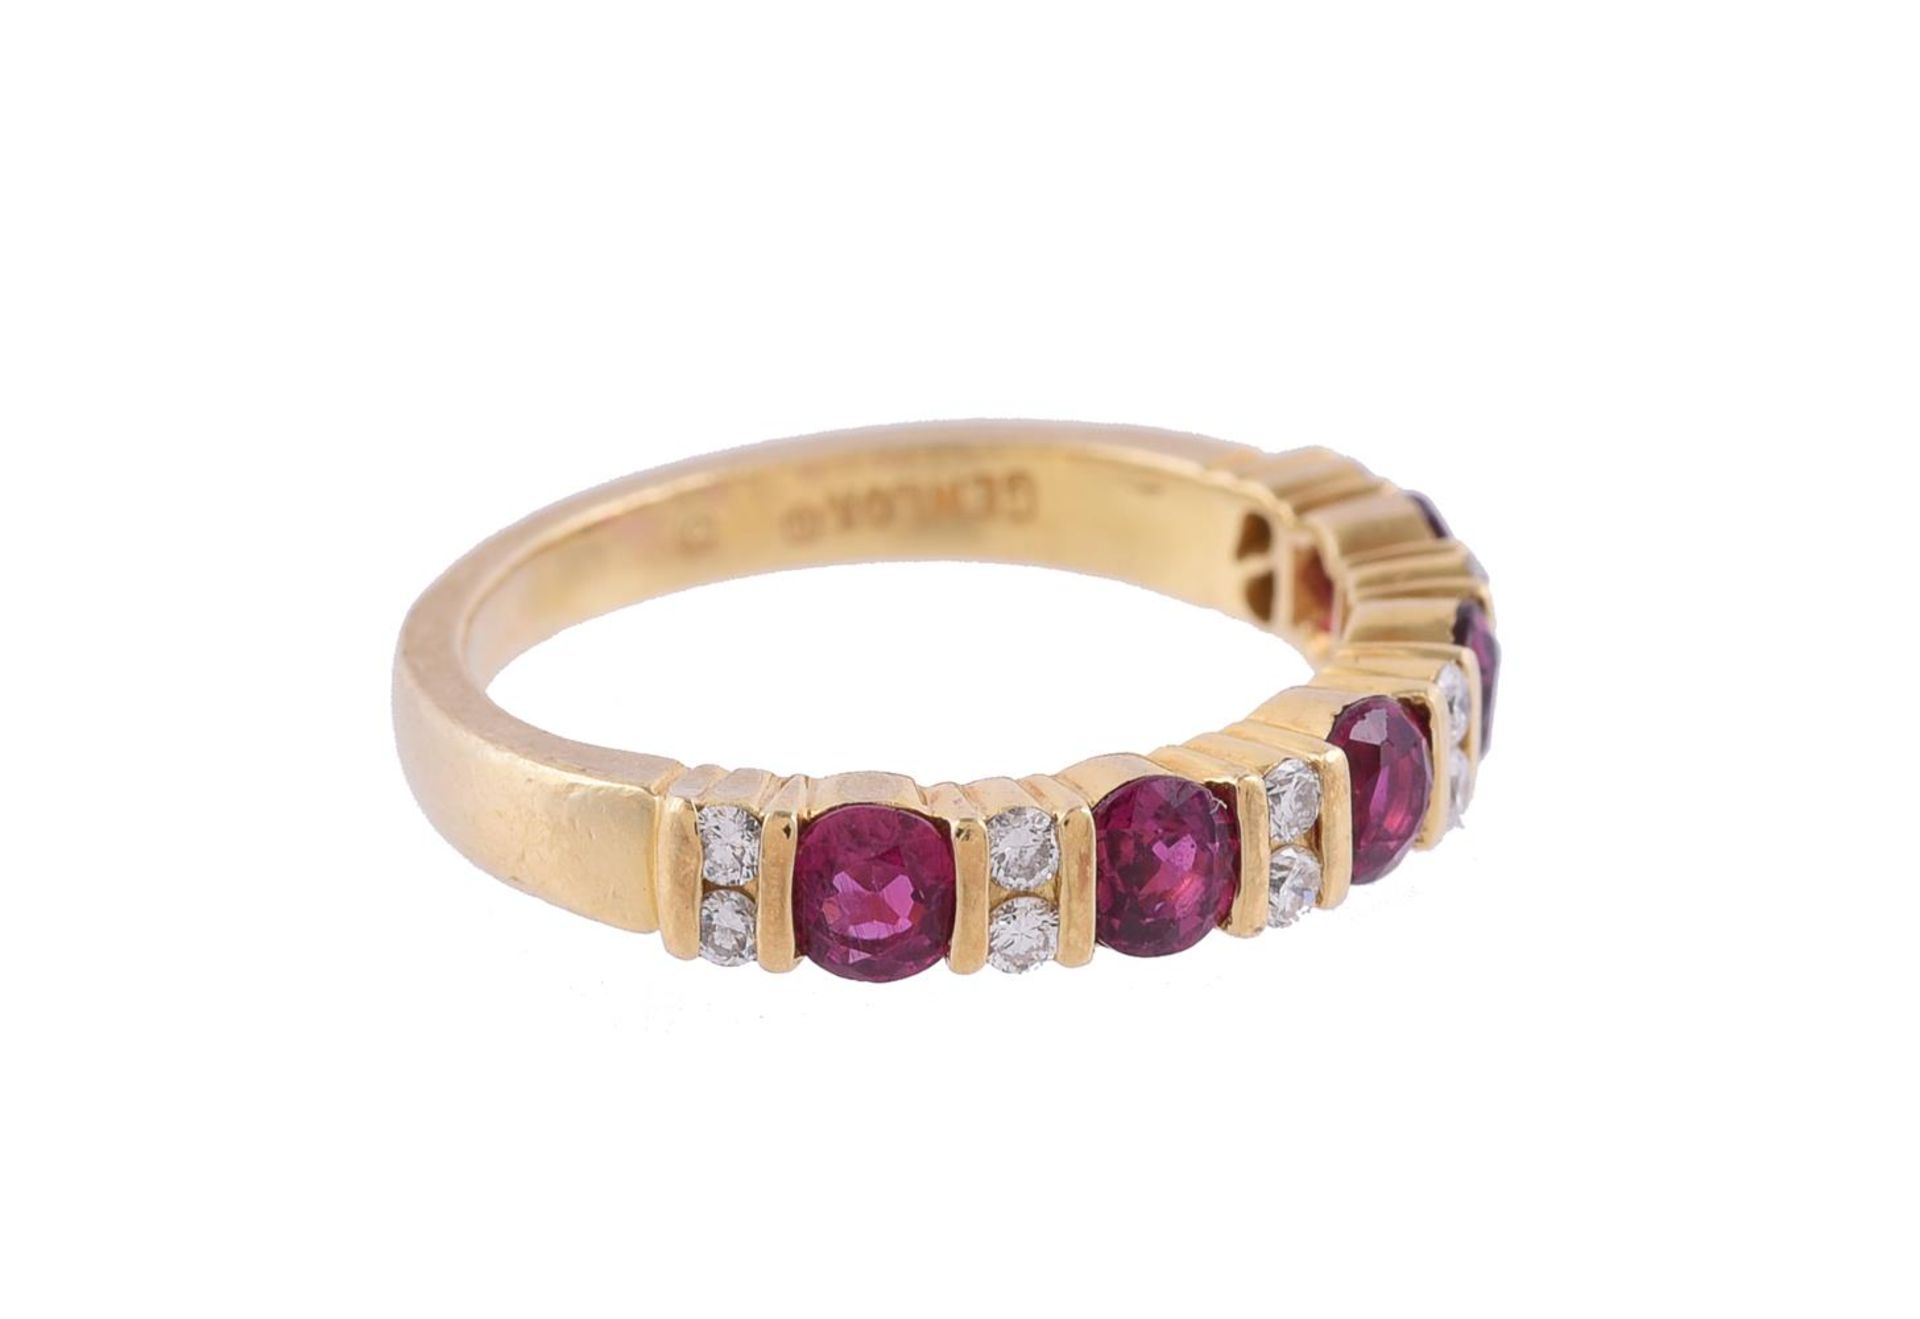 A RUBY AND DIAMOND HALF BAND RING - Image 2 of 2